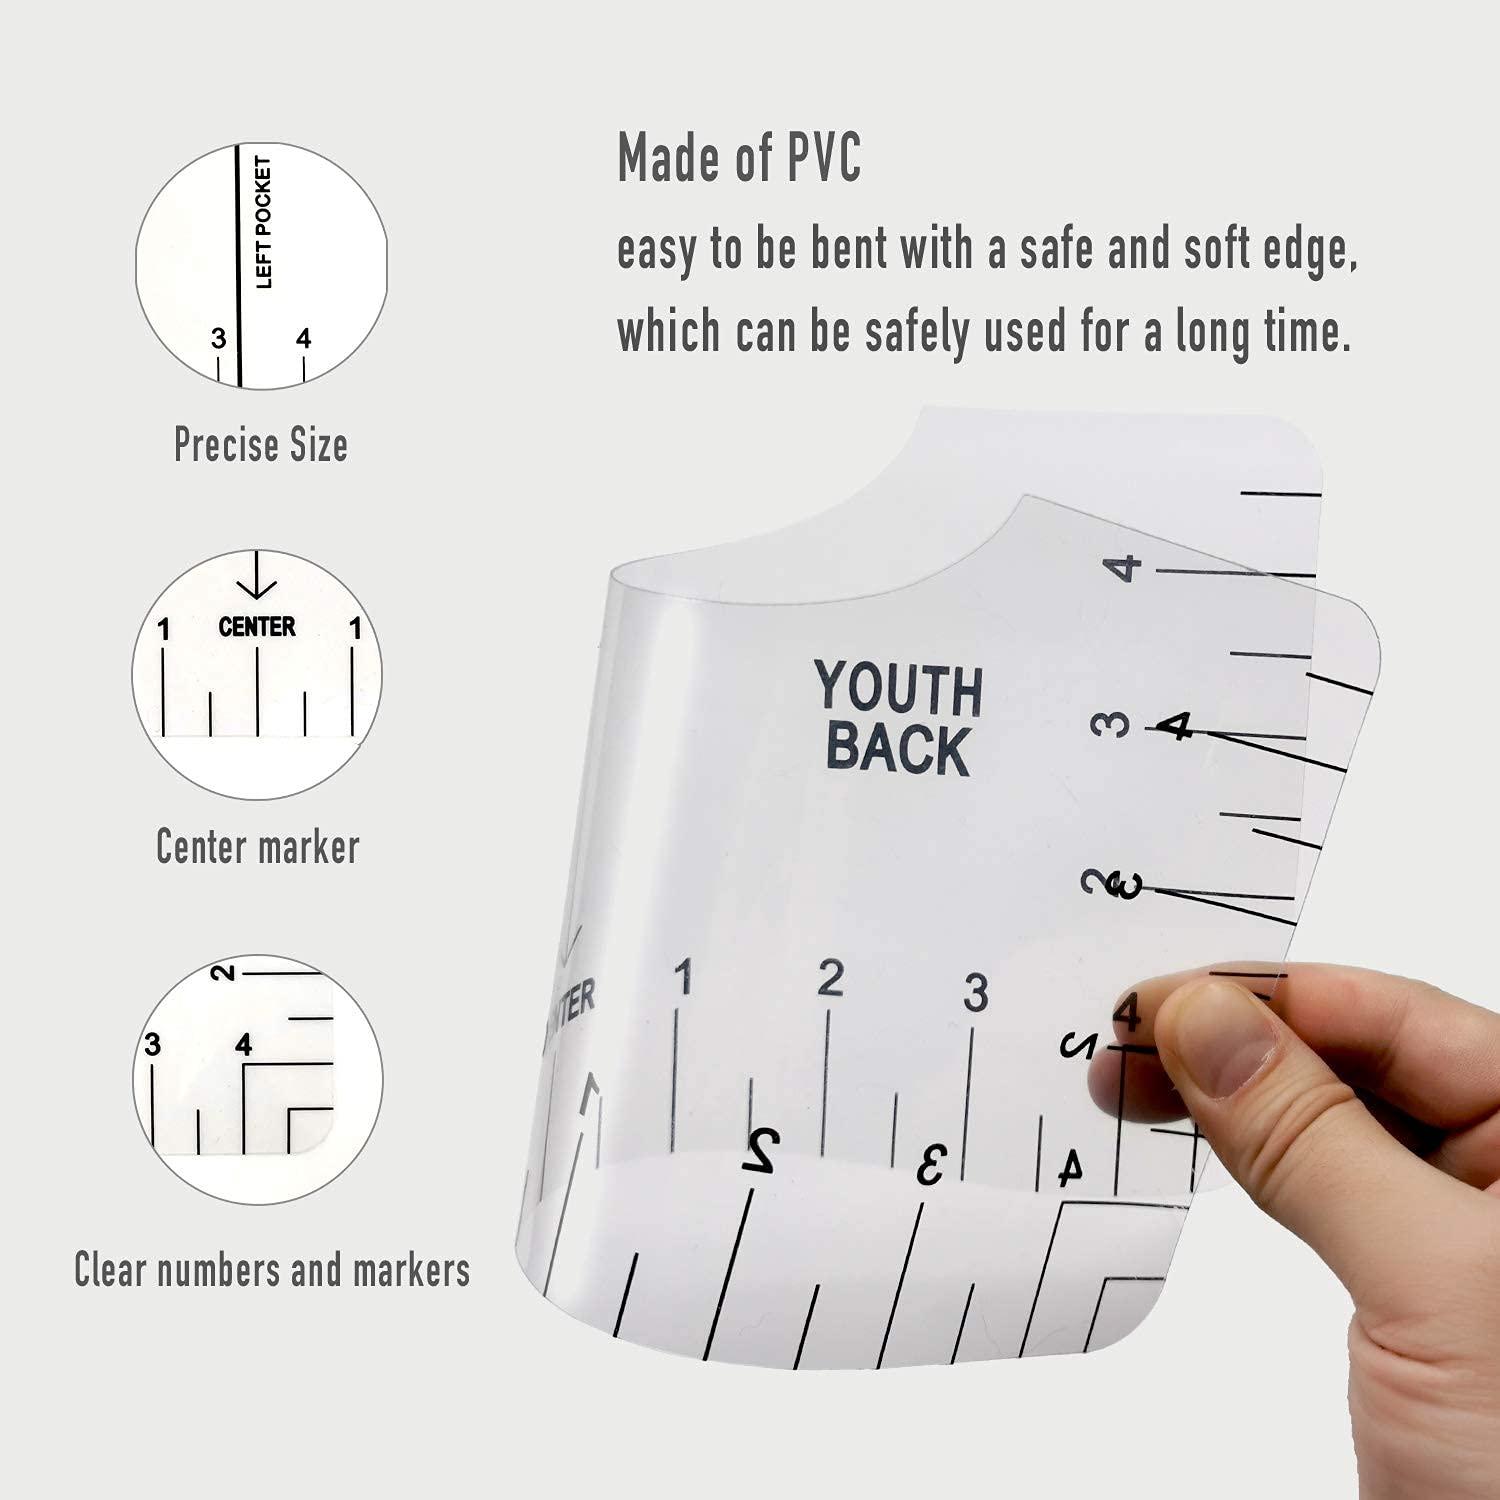 FINFINLIFE, Tshirt Ruler-9Pcs, Tshirt Ruler Guide for Vinyl, Shirt  Alignment, T Shirt Rulers to Center Designs, Transparent Tee Ruler for  Infant Toddler Youth Adult, Front and Back Measurement - Coupon Codes, Promo